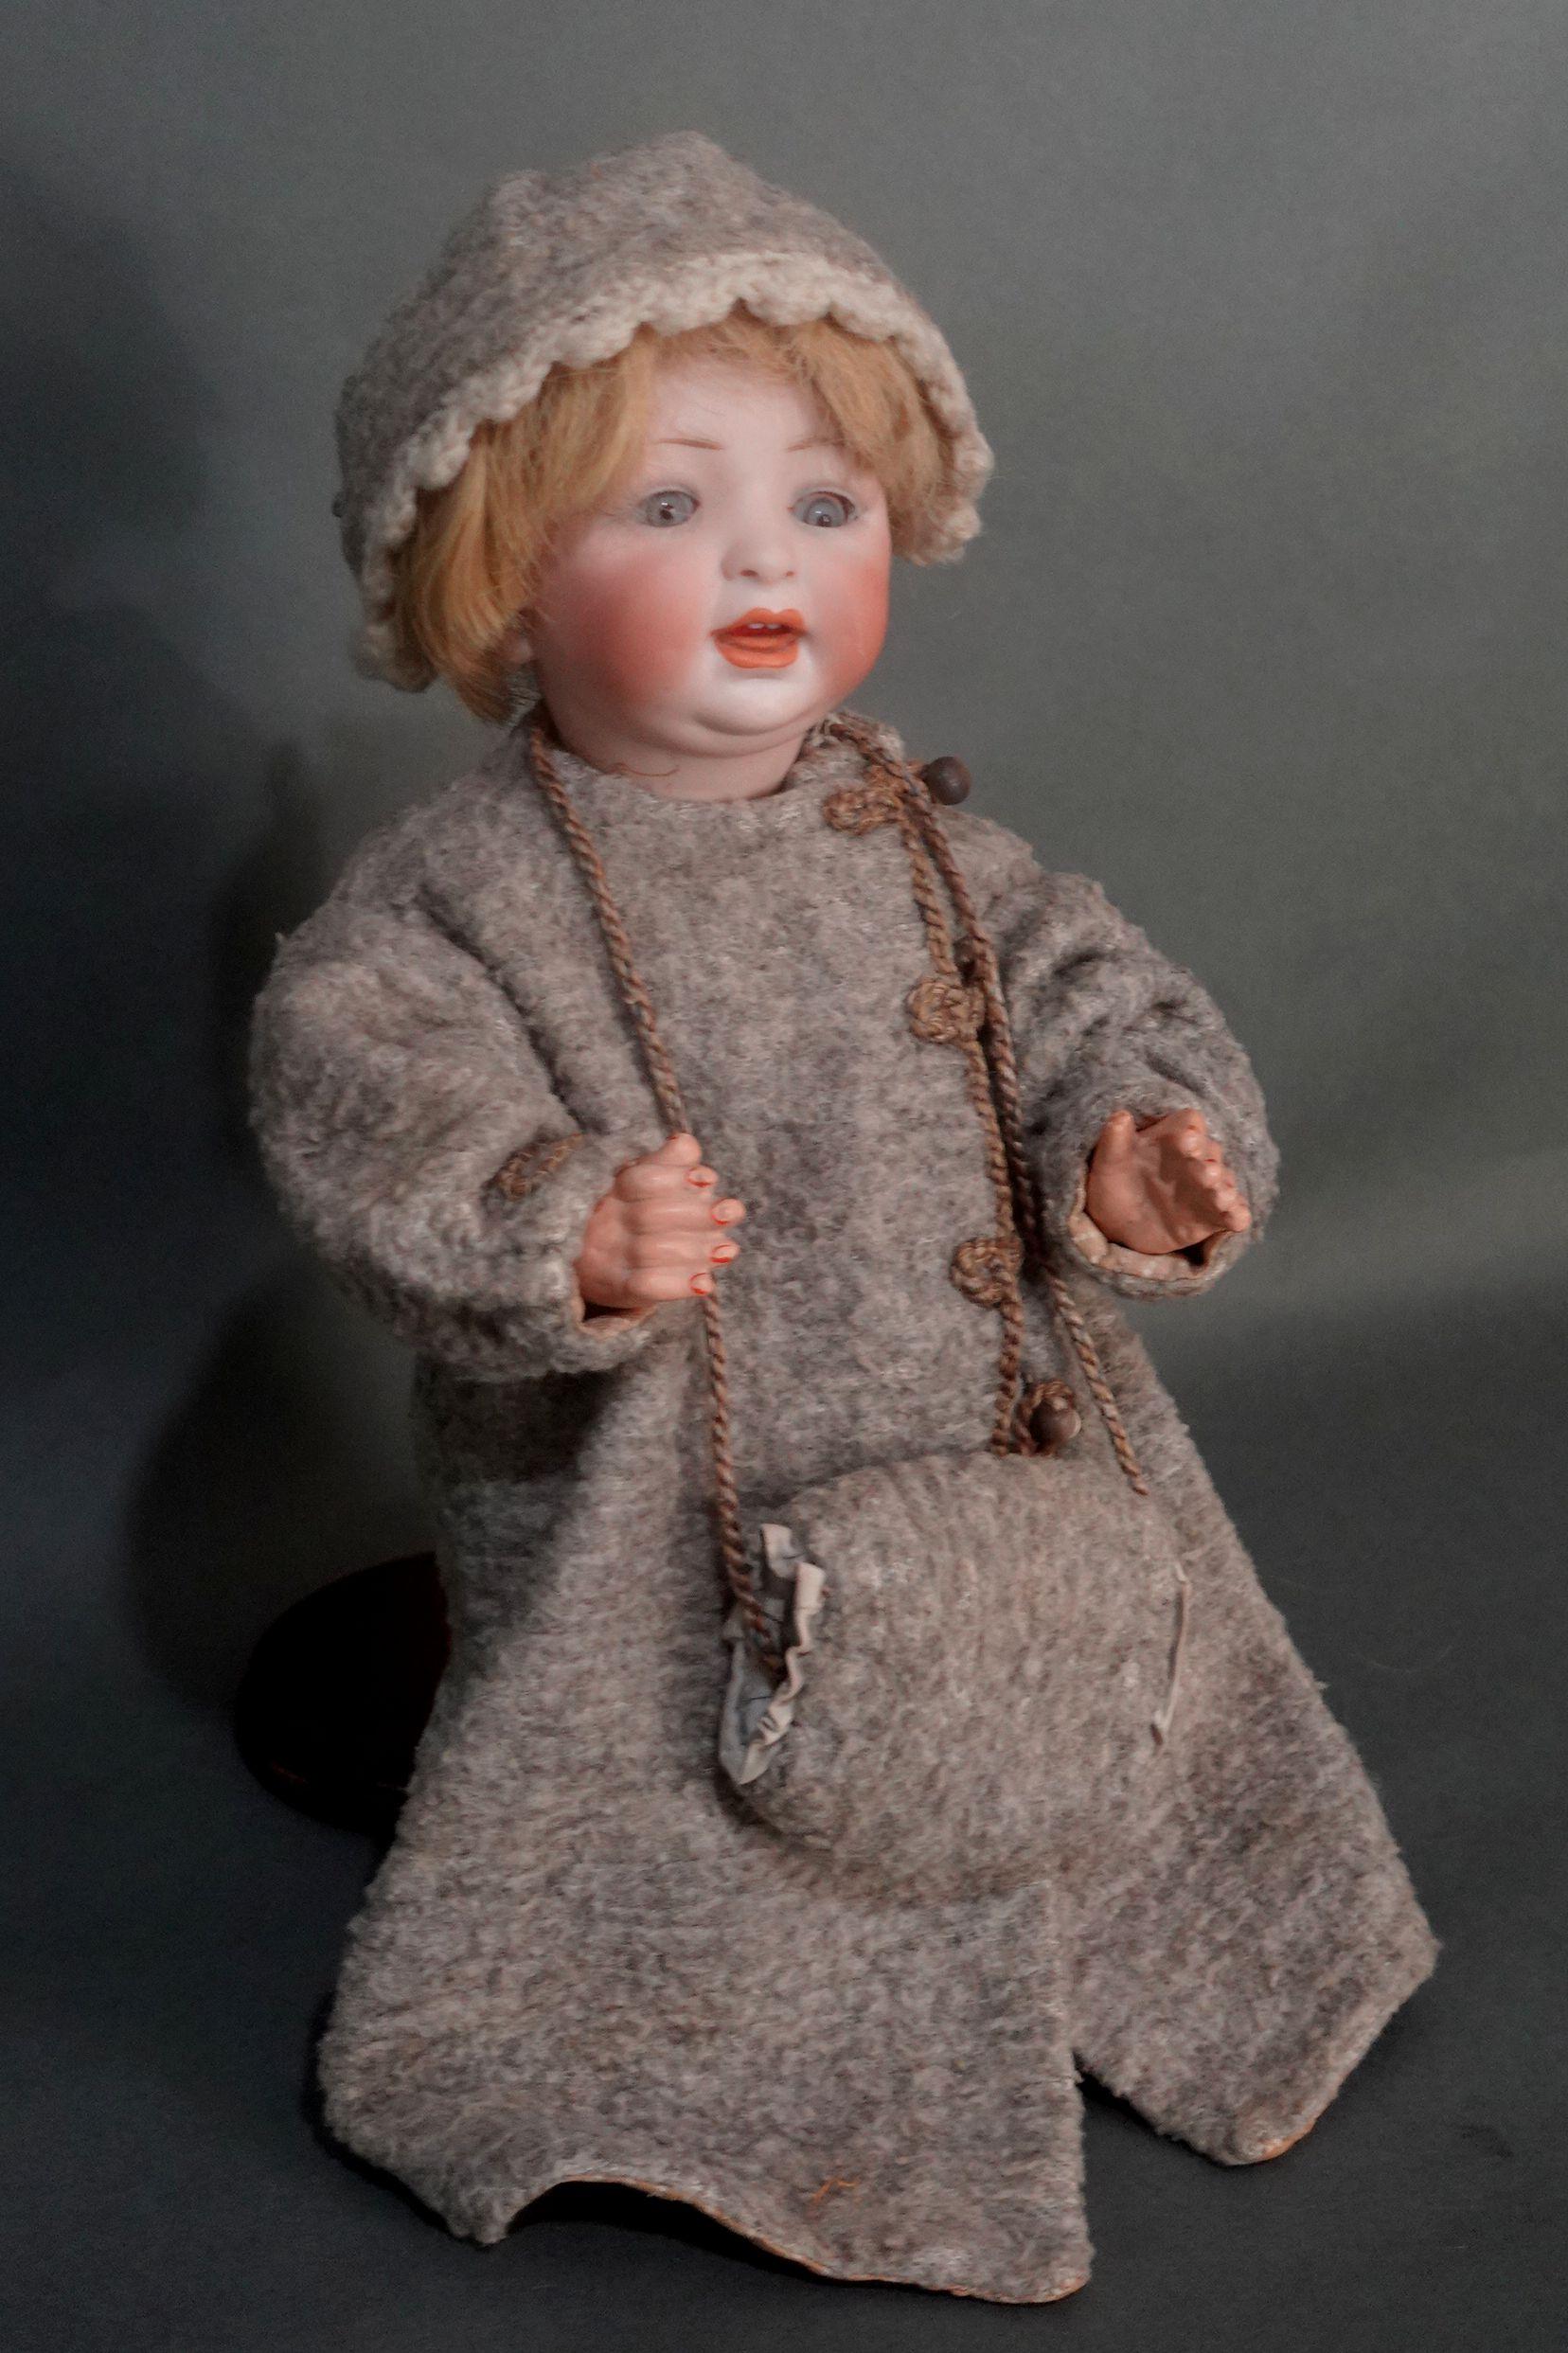 Brushed Antique German Bisque Doll #152/4 Happy Character Baby by Hertel Schwab For Sale